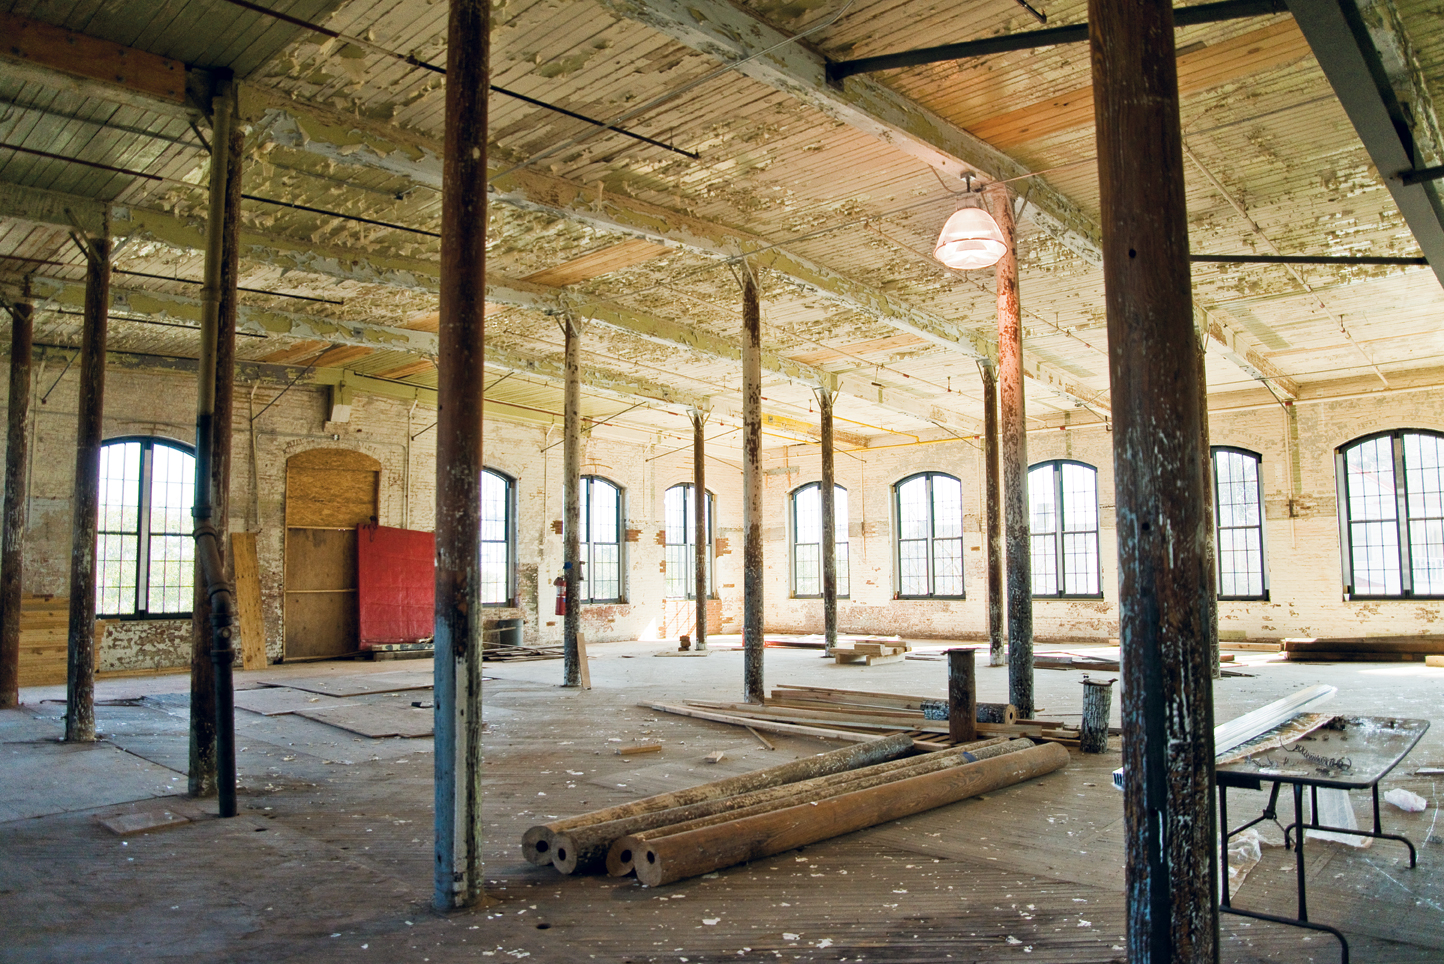 Good Bones: Palmer’s three new projects will occupy 75,000 square feet of the historical Cigar Factory building.